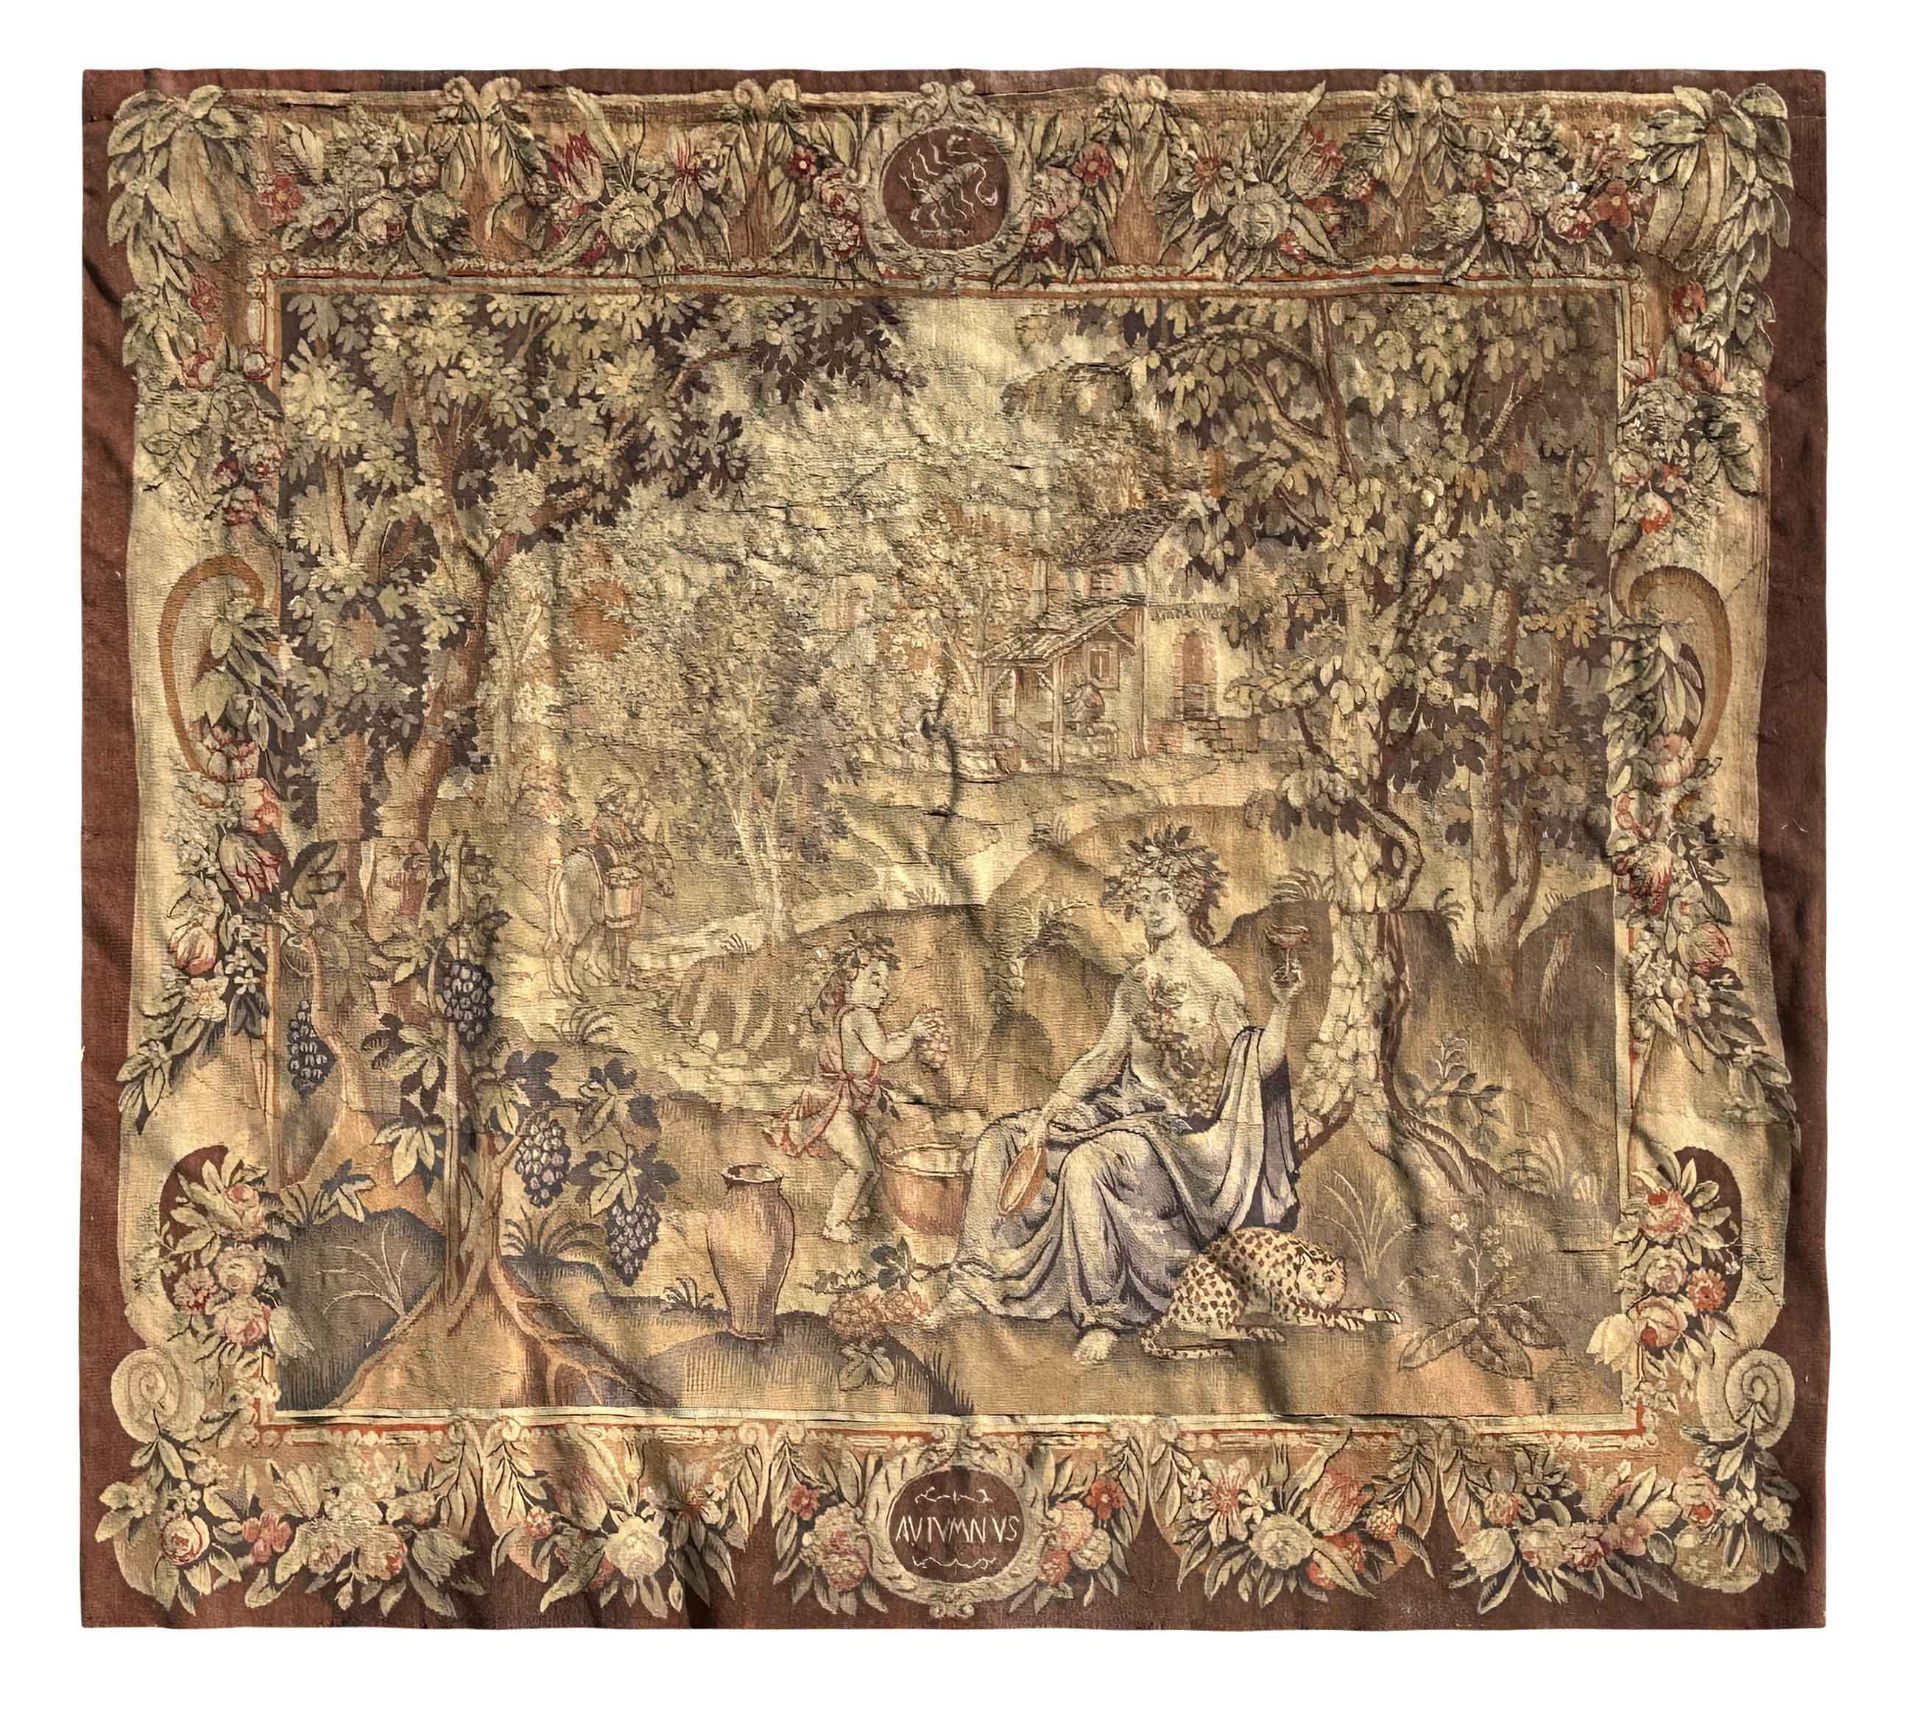 Tapestry. 19th century. Youthful Bacchus.